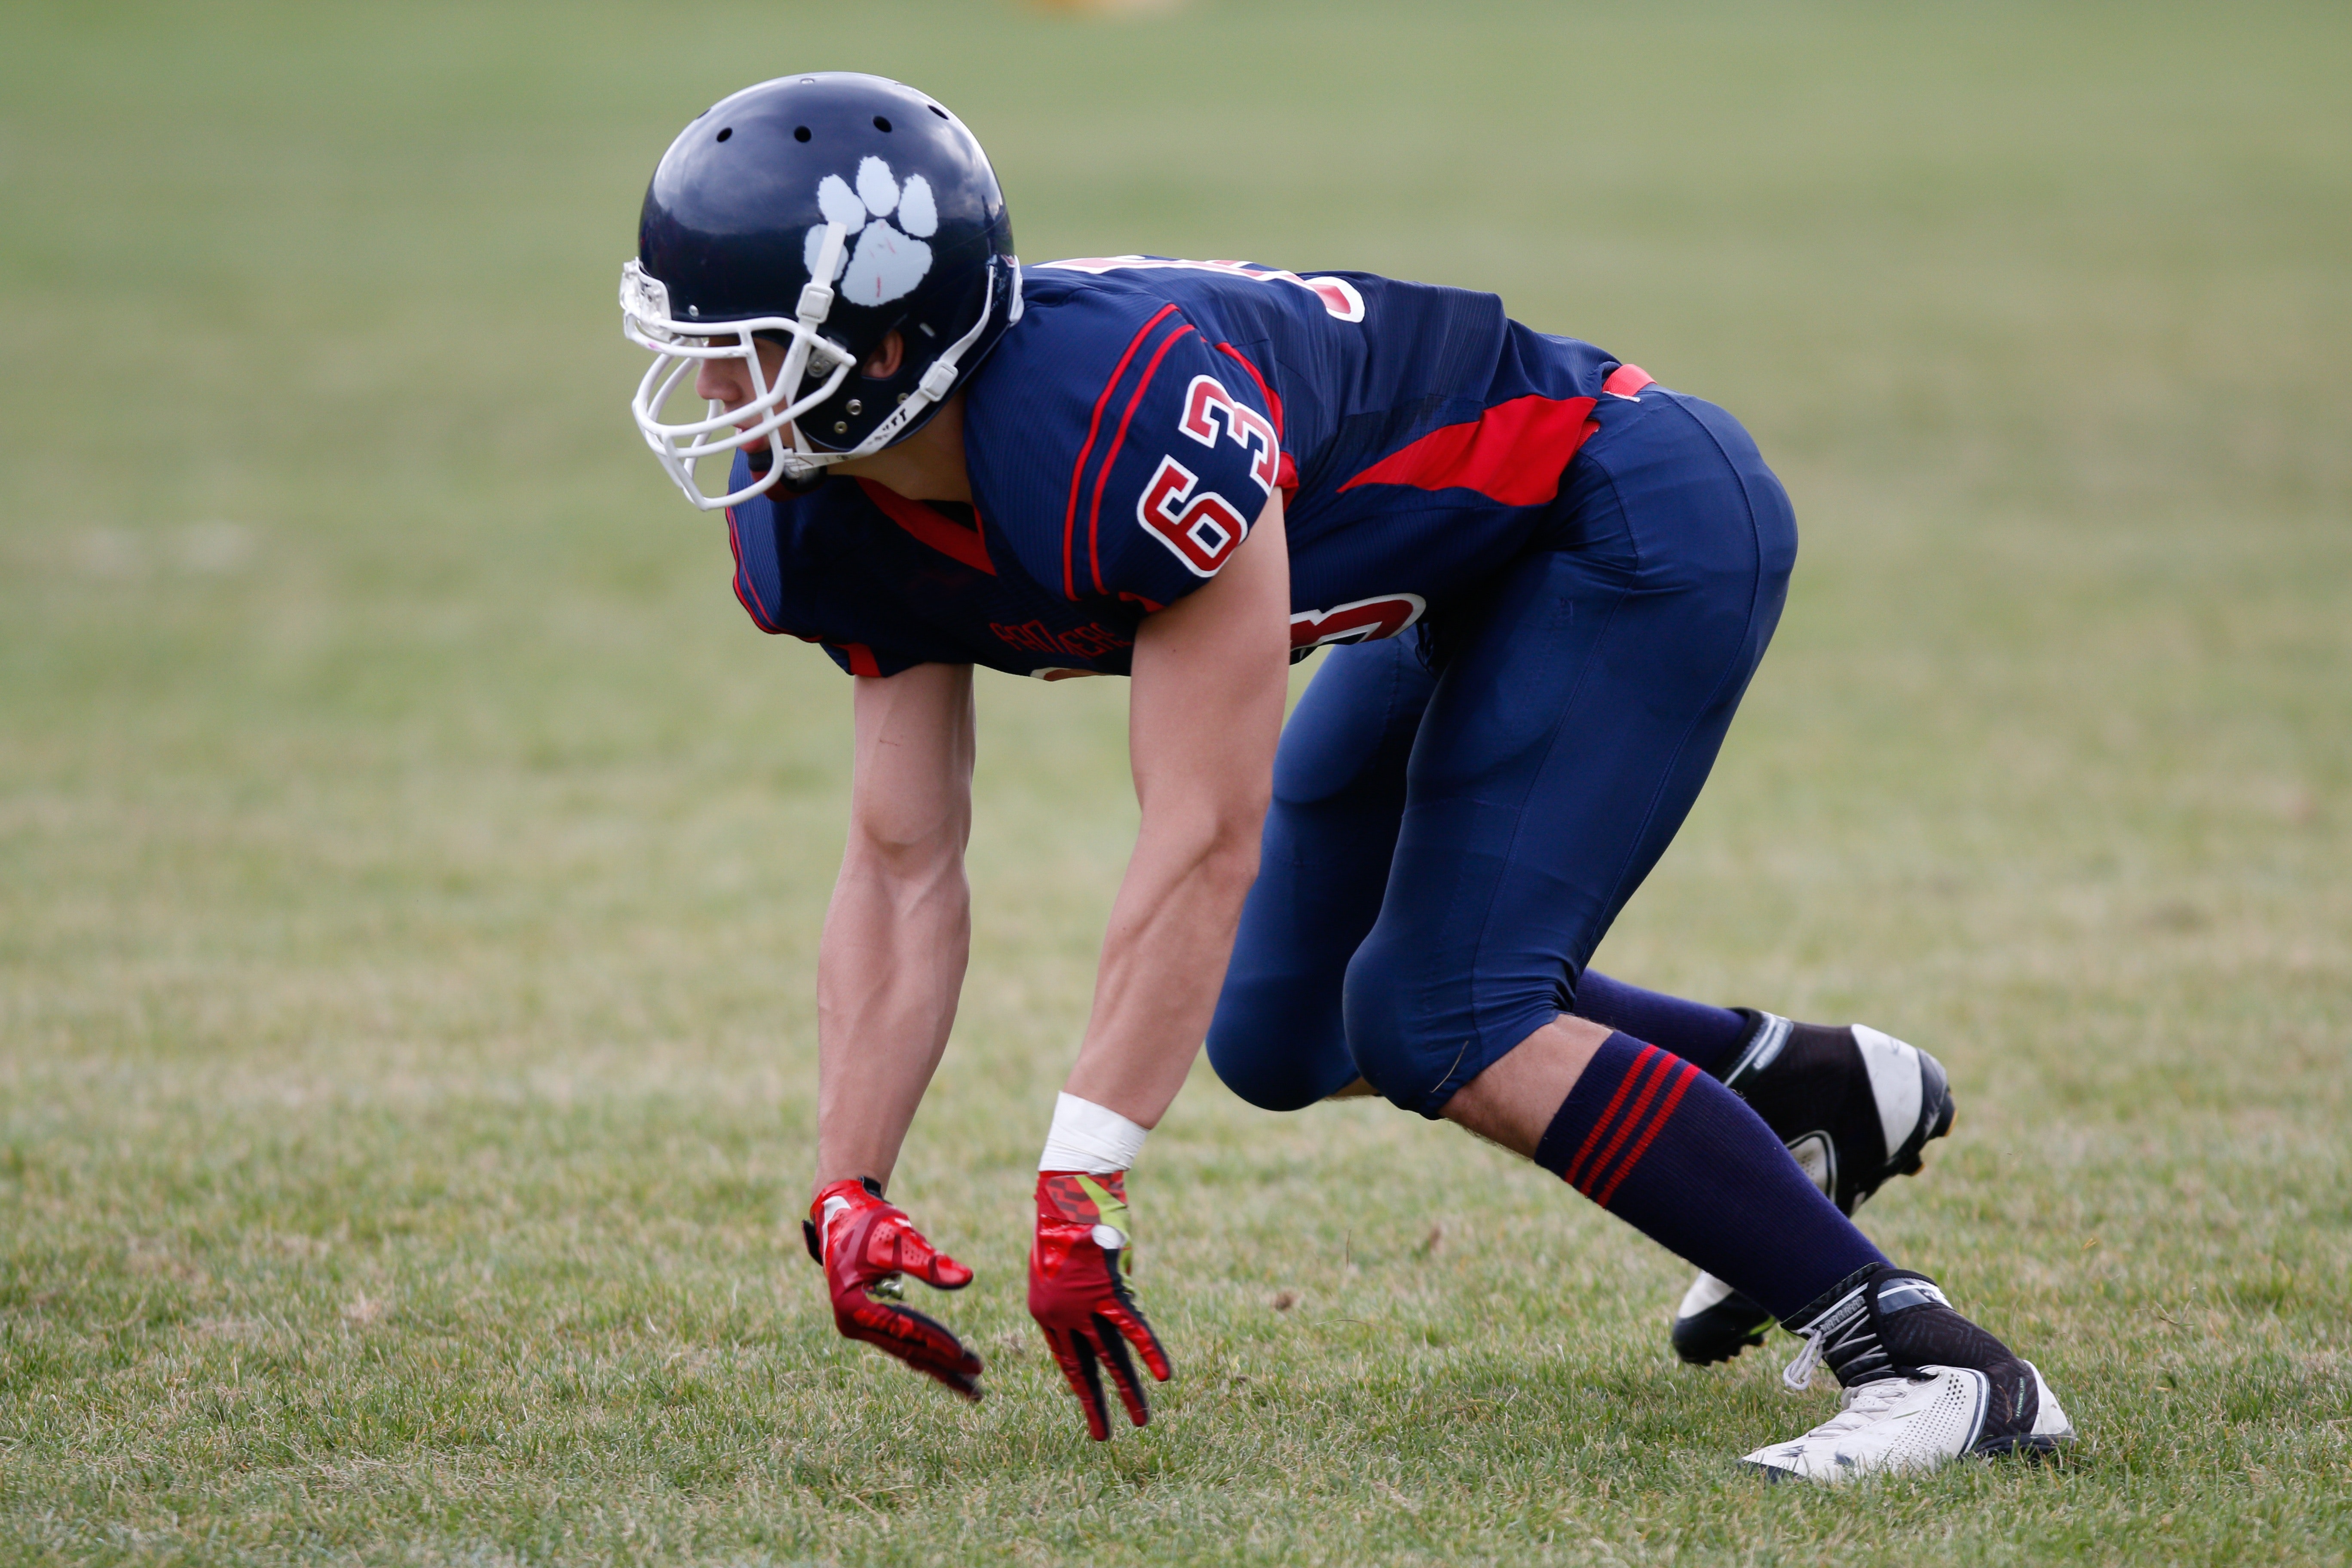 Free photo: Man in Blue American Football Suit on Green Grass Field ...